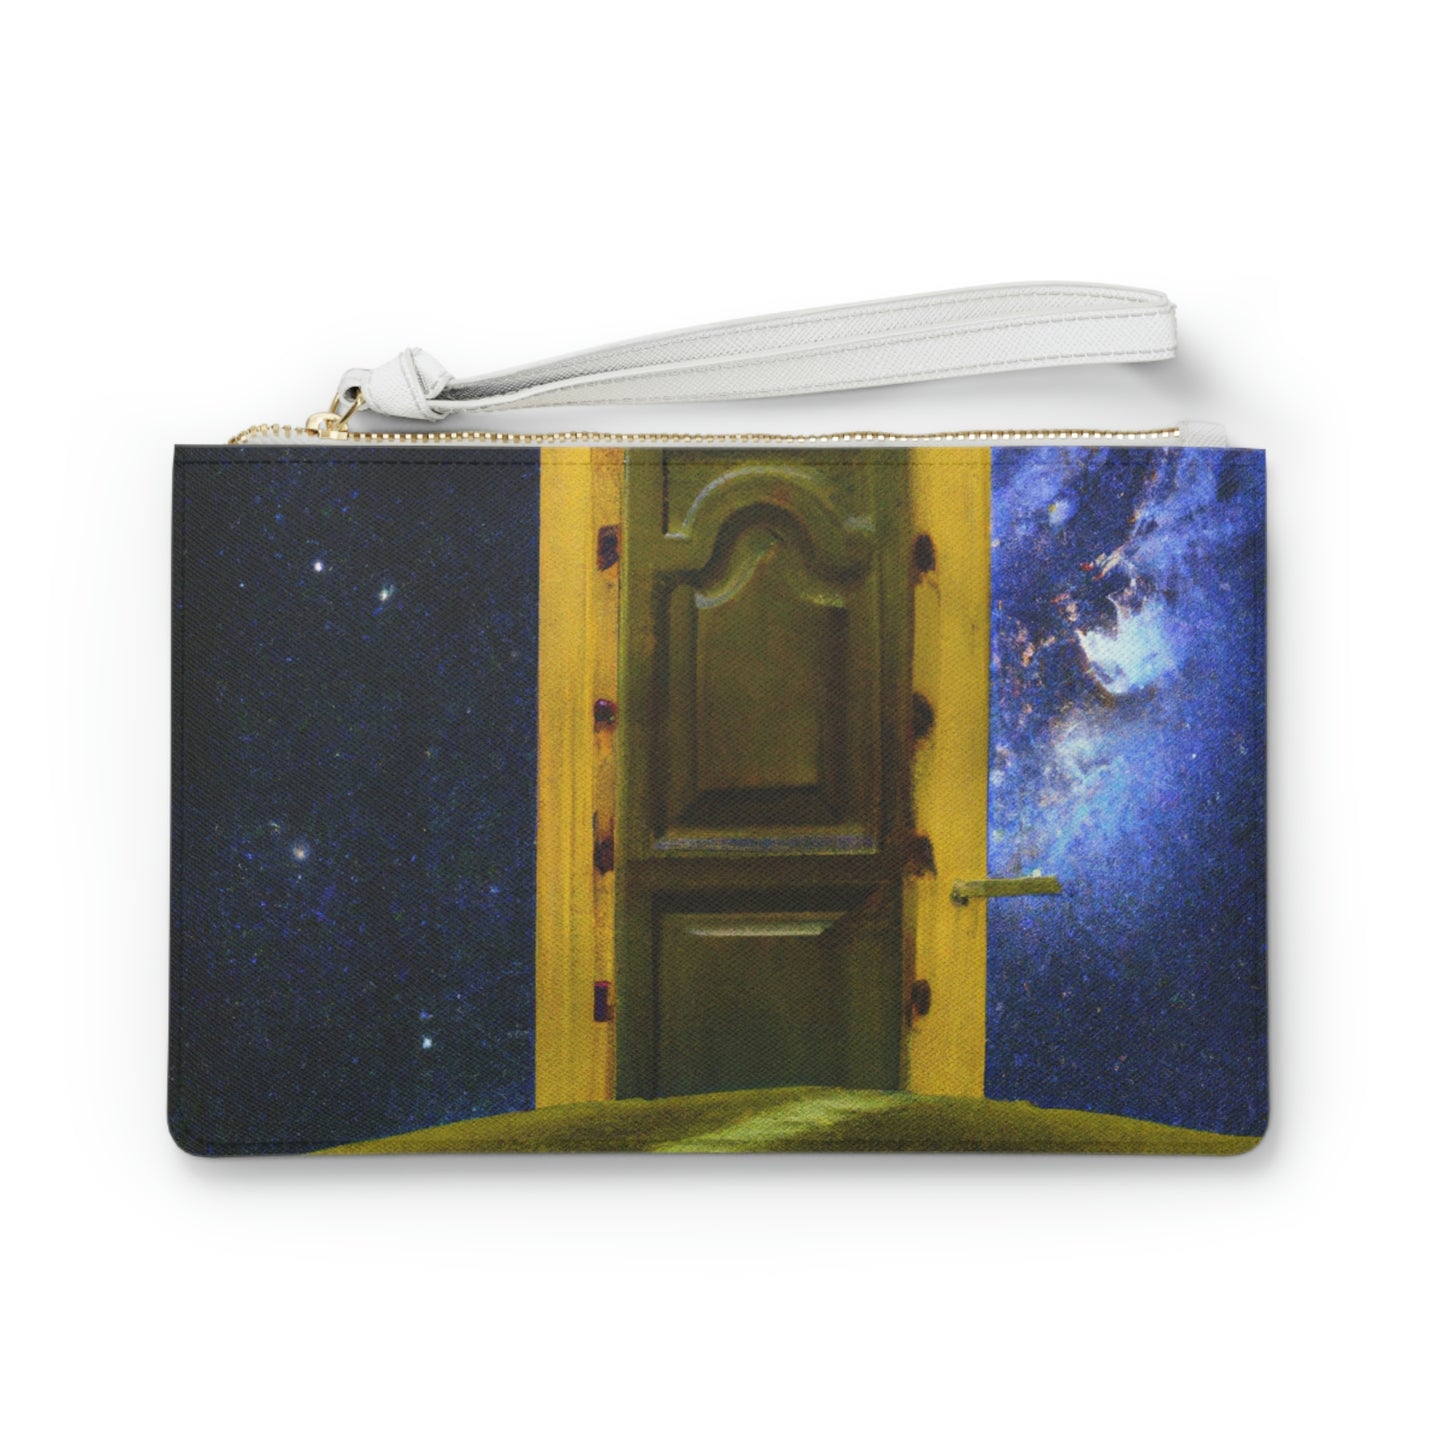 The Heavenly Threshold - The Alien Clutch Bag